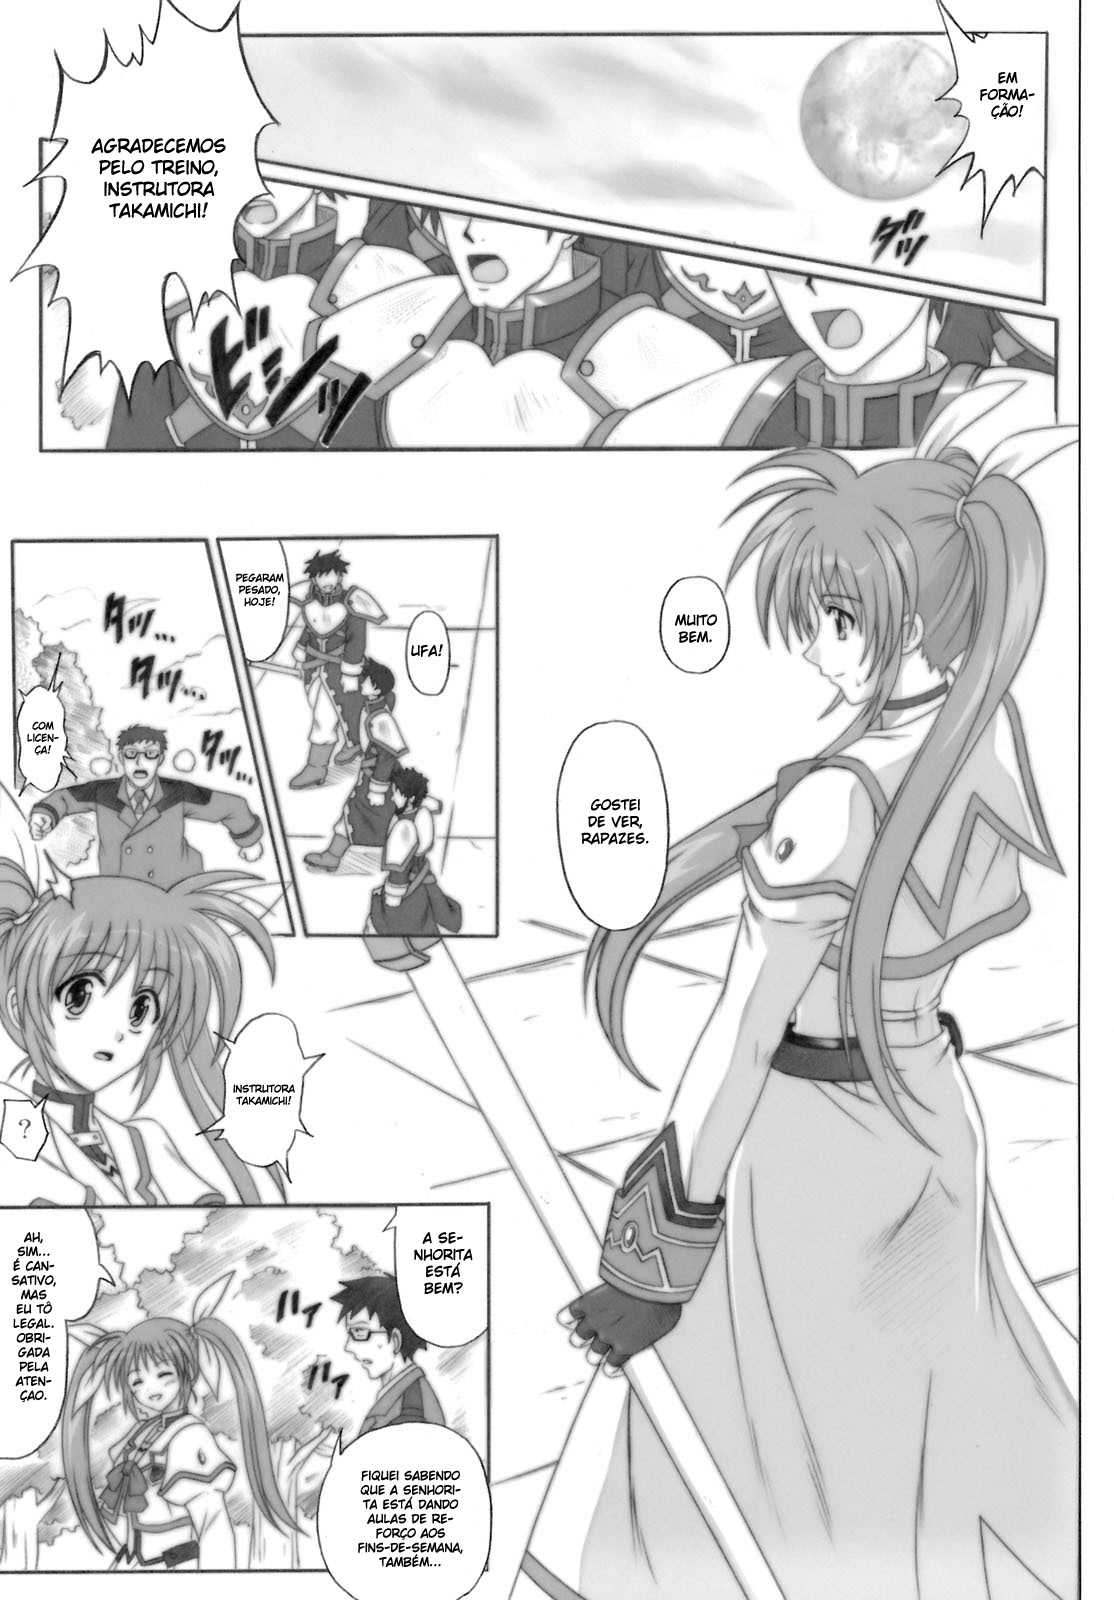 [CYCLONE (Izumi Kazuya)] 840 -Color Classic Situation Note Extention- (Mahou Shoujo Lyrical Nanoha) [Portuguese-BR] [サイクロン (和泉和也)] 840 -Color Classic Situation Note Extention- (魔法少女リリカルなのは)